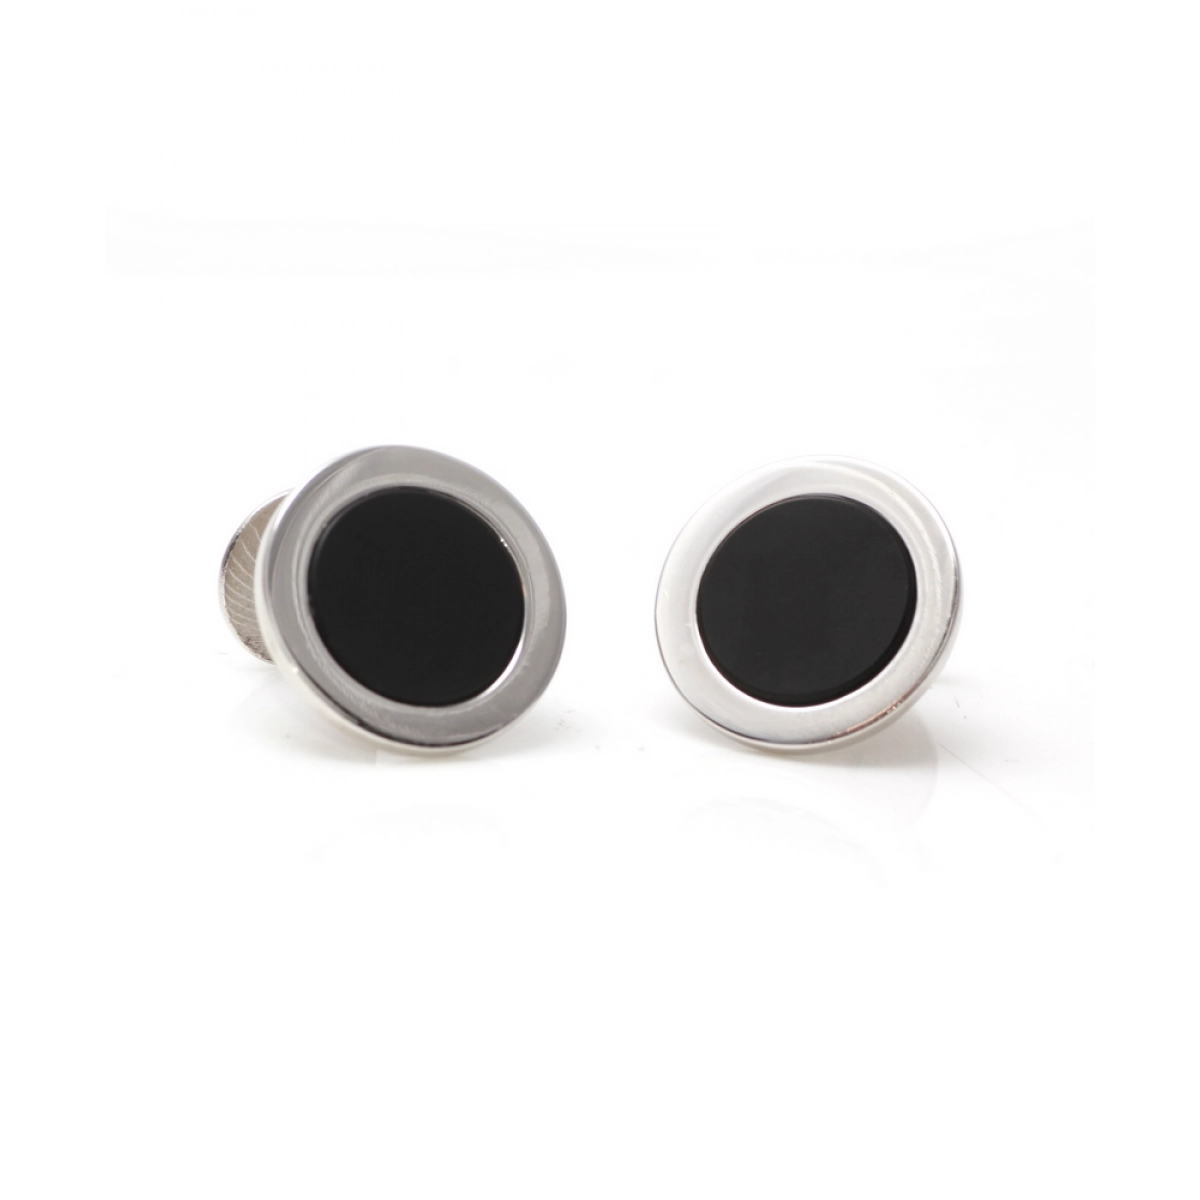 CUFFLINKS ARE STERLING SILVER, WITH STONE ONYX AND GLOSS FINISH. CRESBER To Sara 4090089150